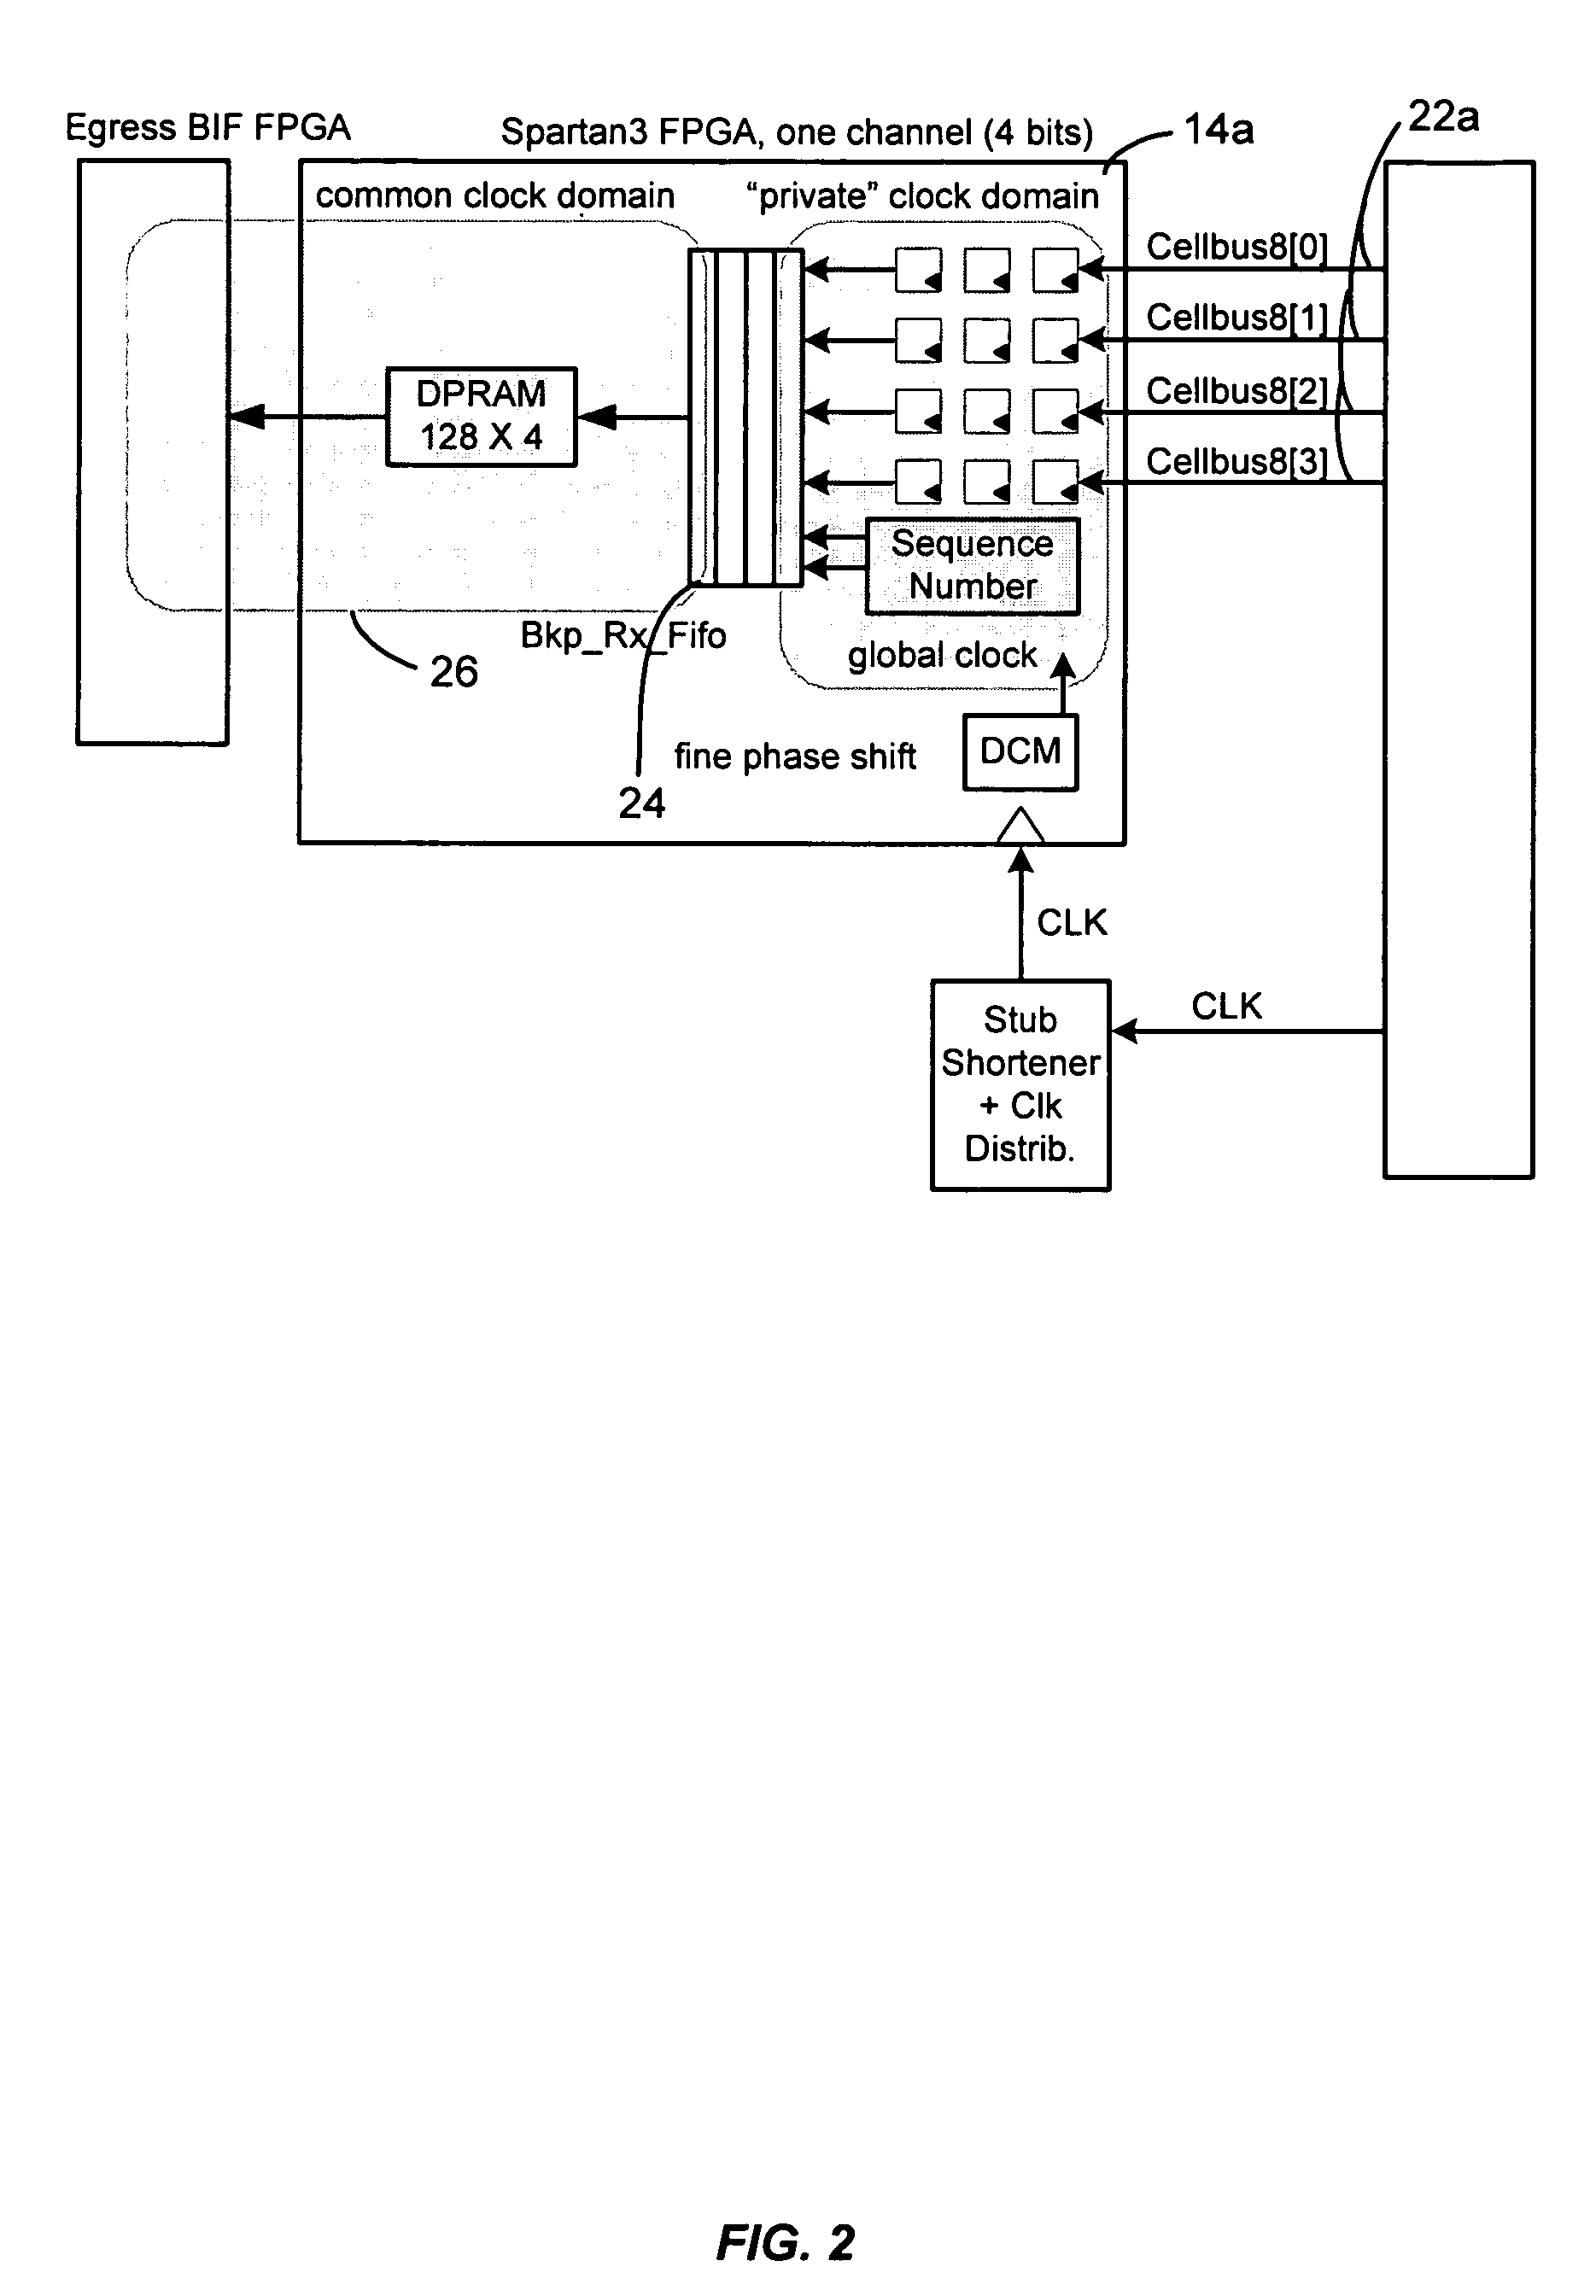 Method and system for recovering and aligning synchronous data of multiple phase-misaligned groups of bits into a single synchronous wide bus